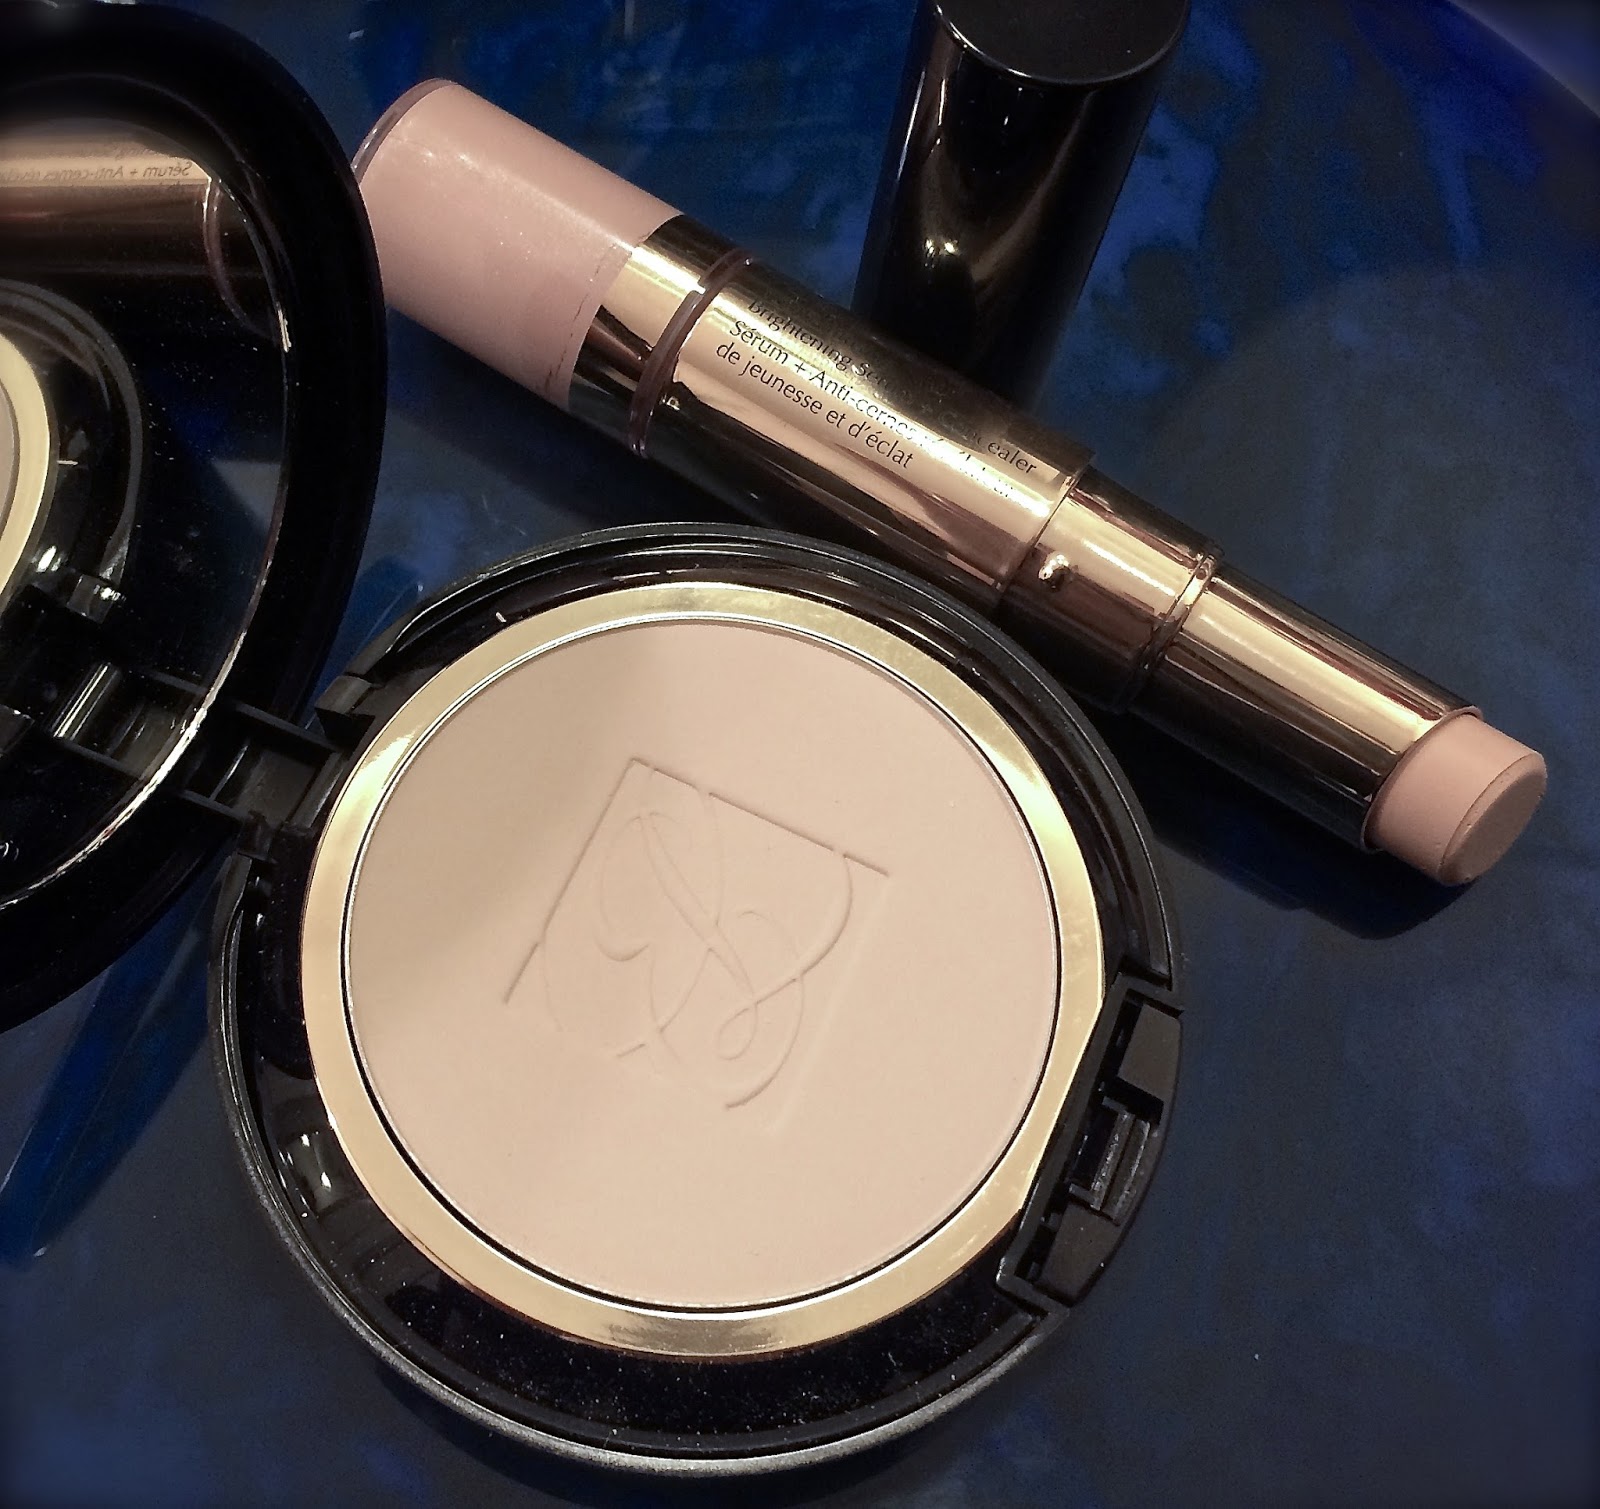 Dancers Guide: Review: Estee Lauder Perfectionist Serum + and Double Wear Powder